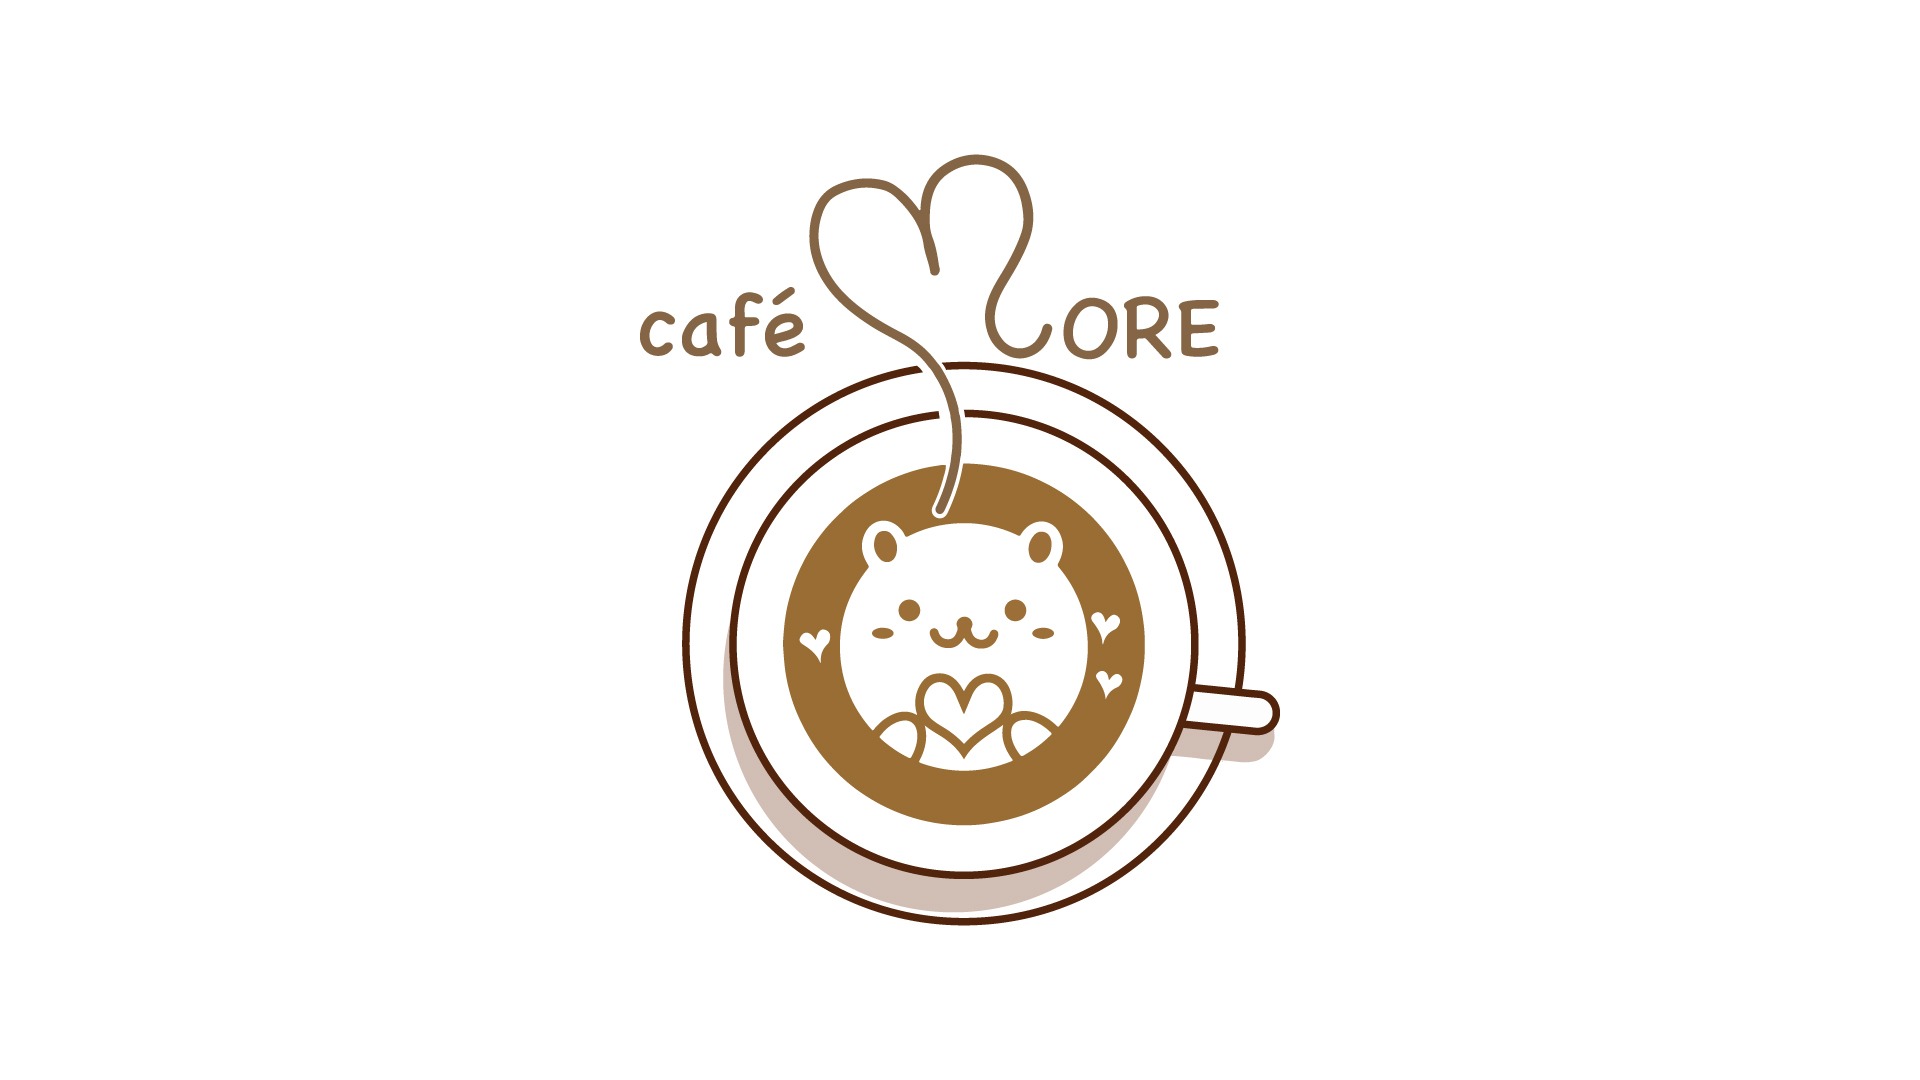 cafe MORE